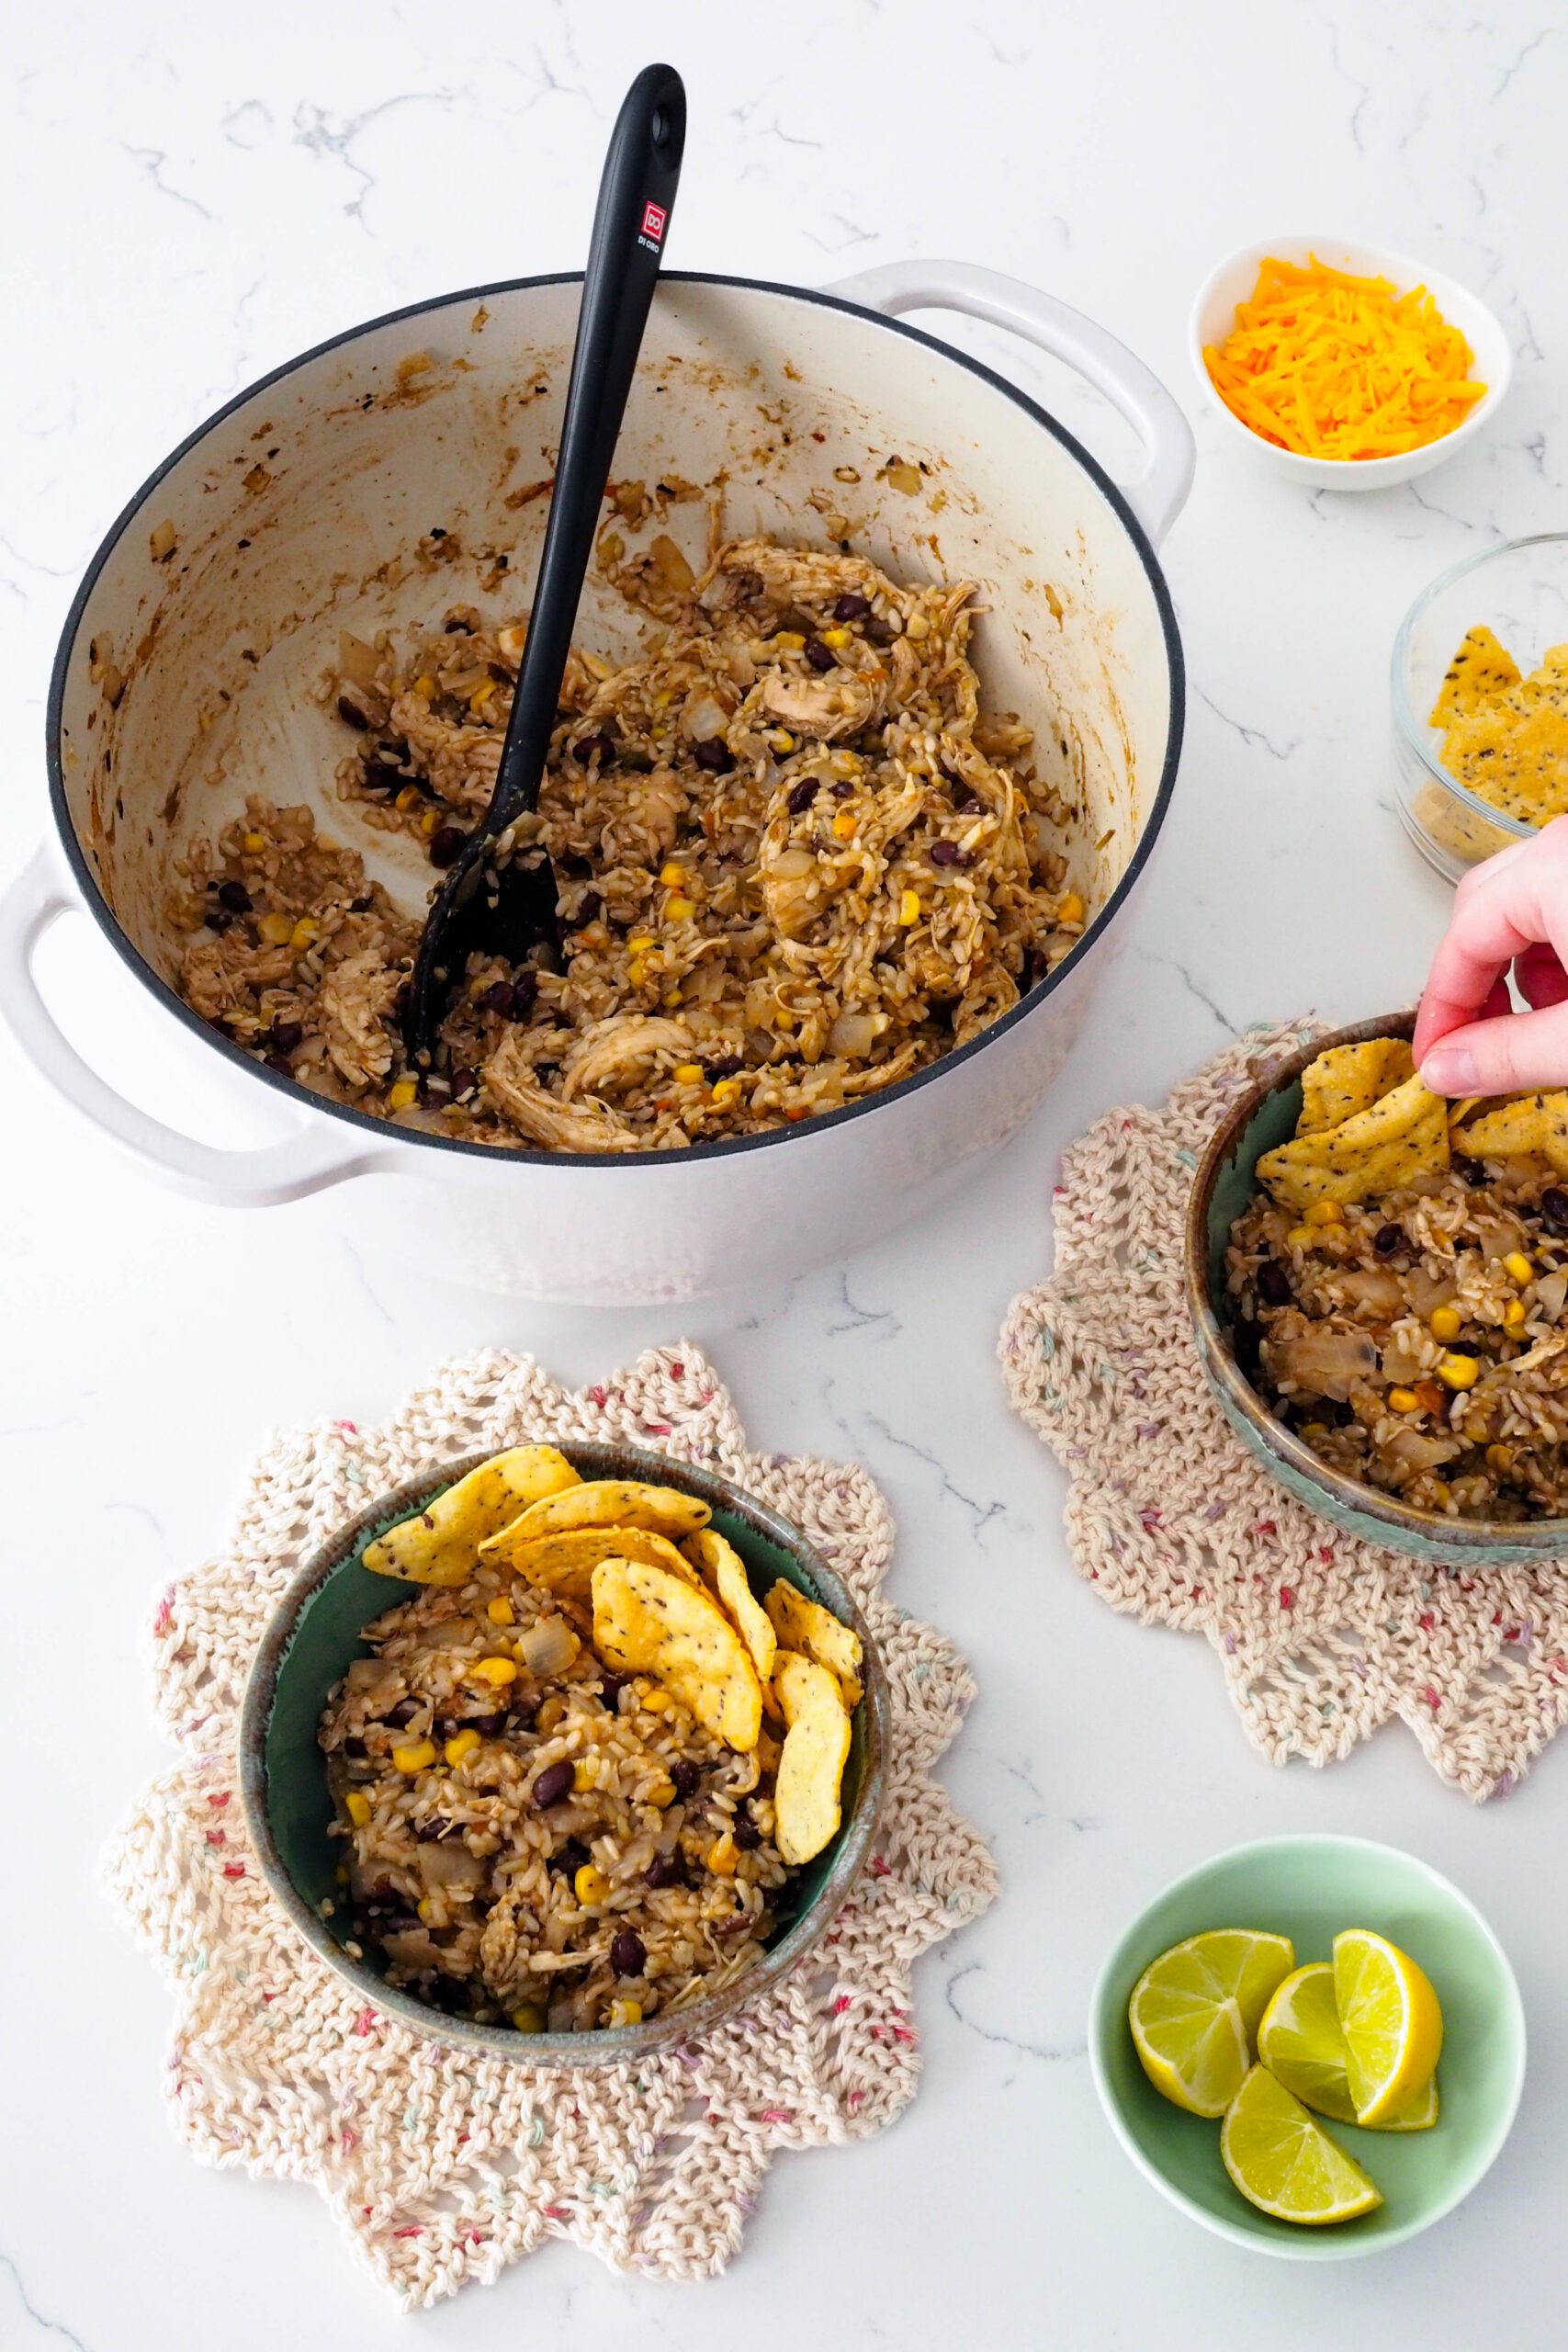 A hand adds tortilla chips to a bowl of one-pot chicken and brown rice.